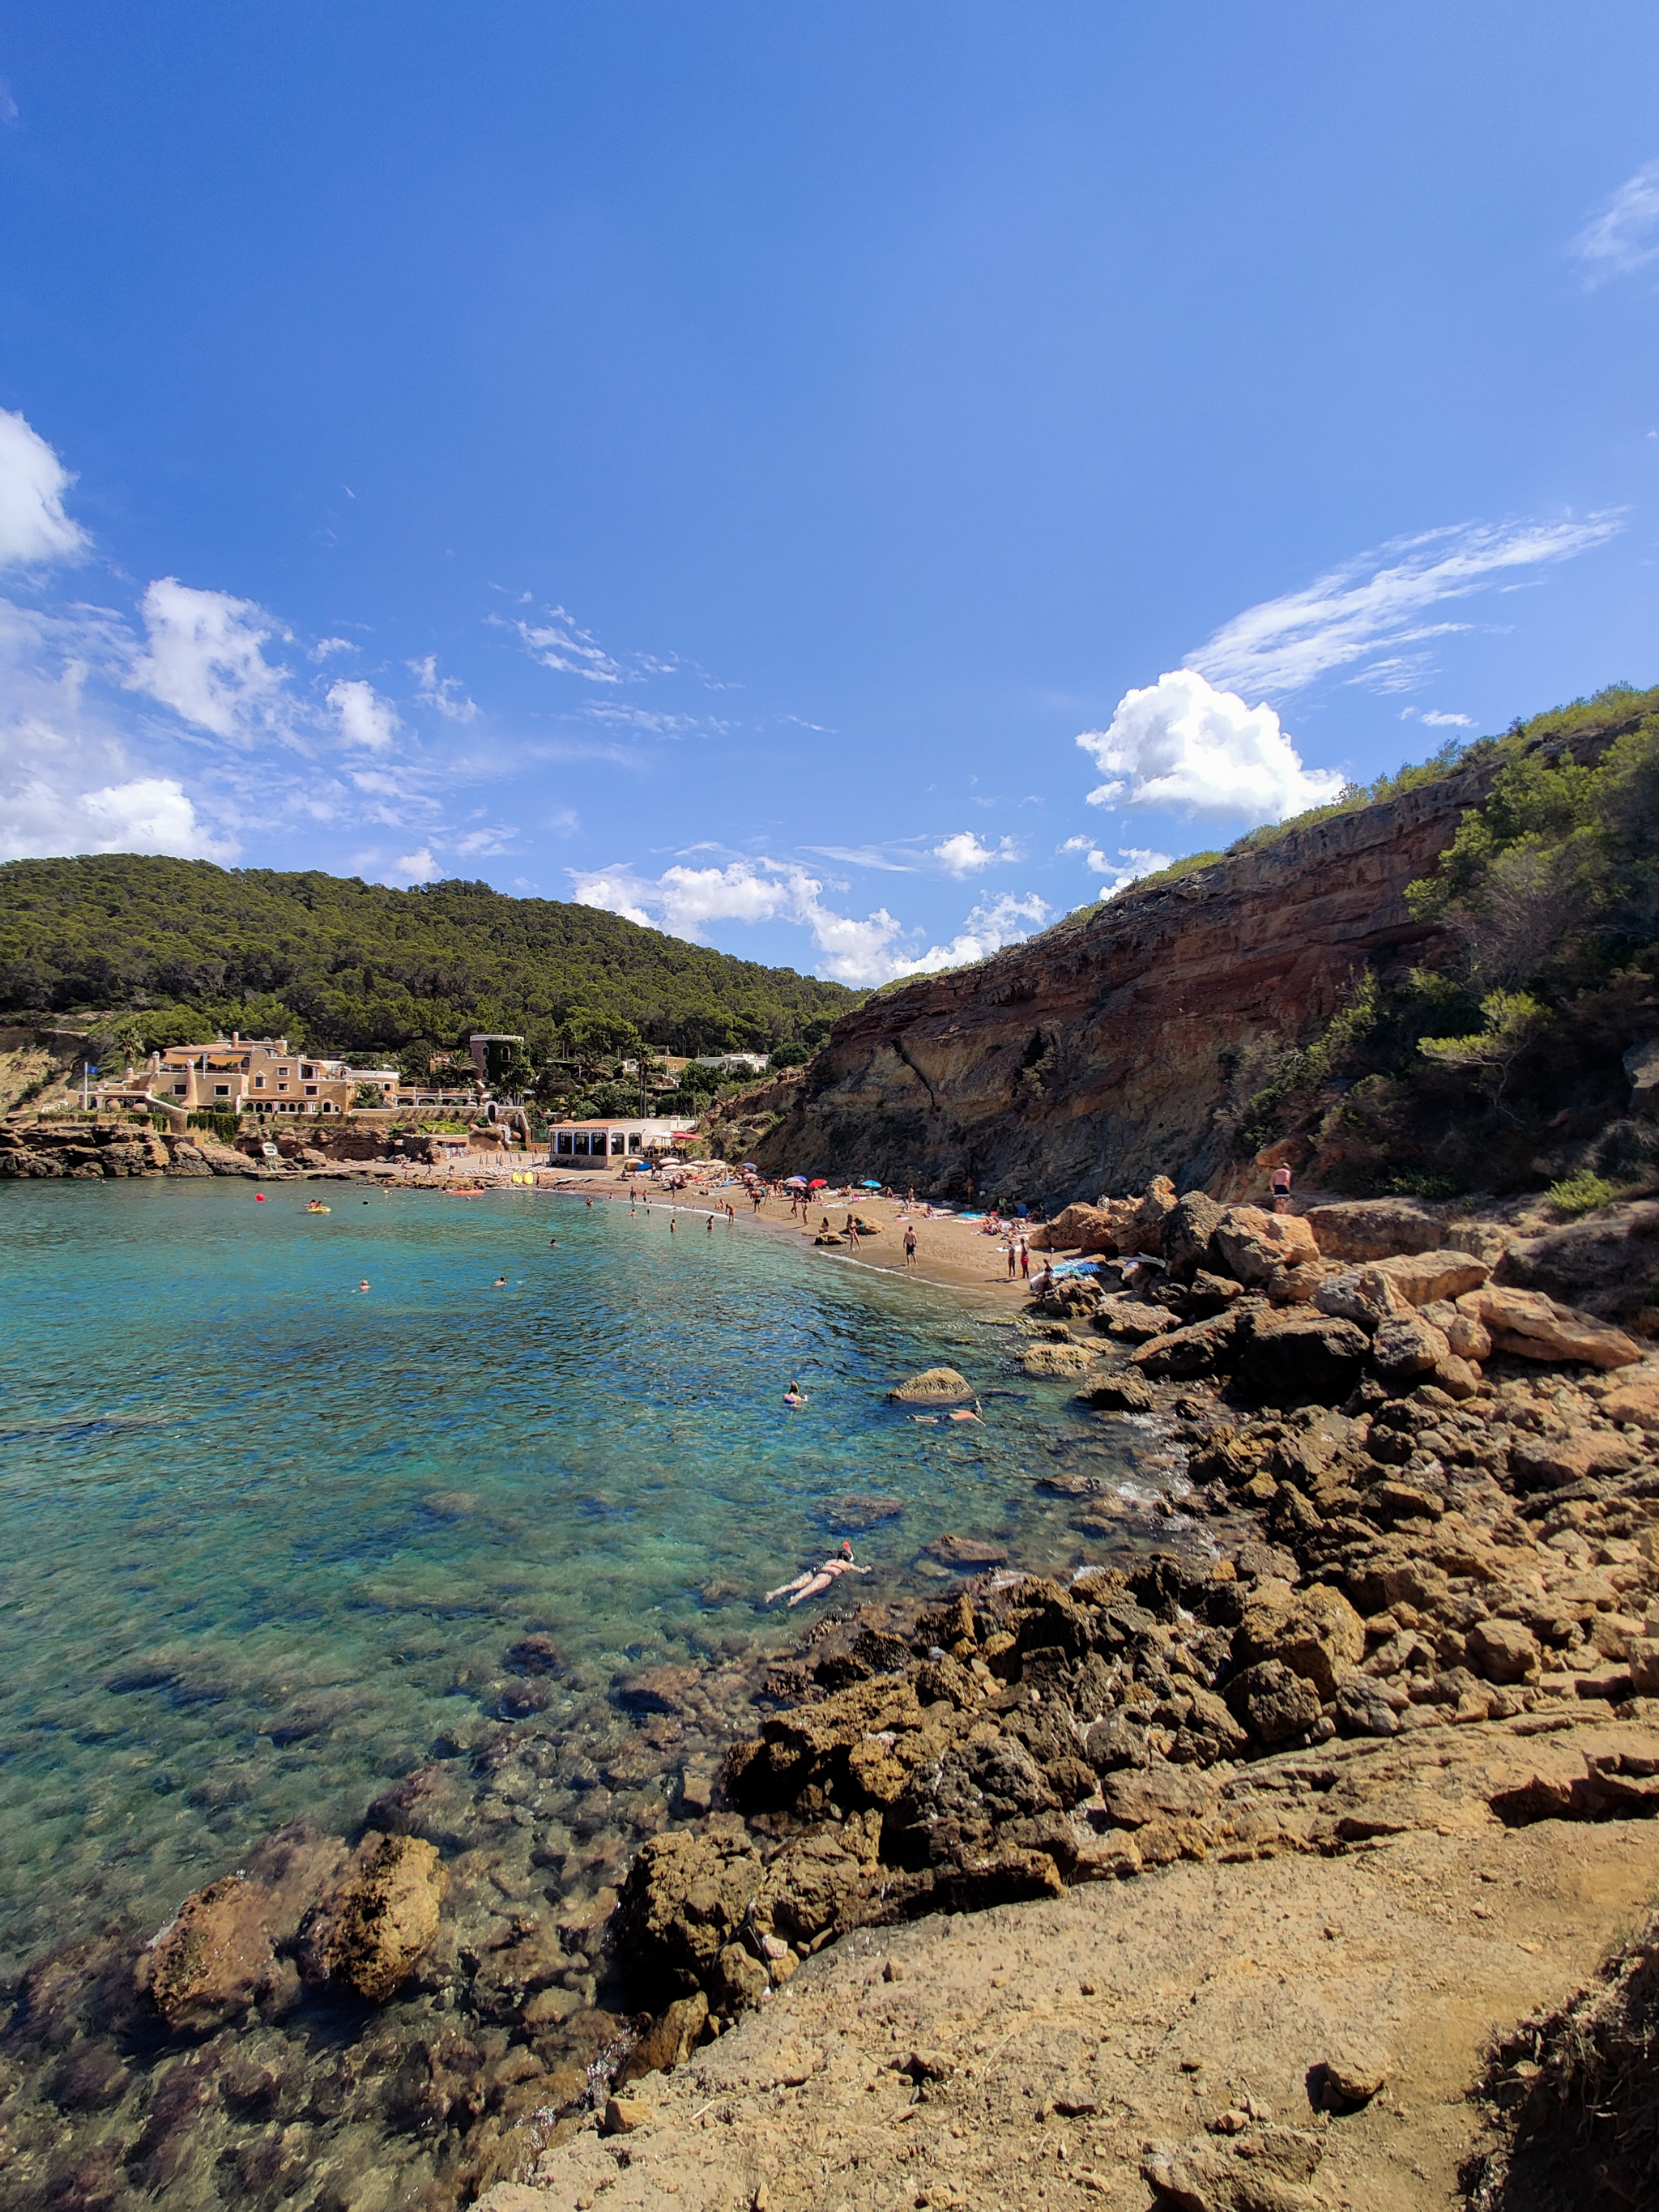 3 Places To Experience the Healing Mud Baths of Ibiza